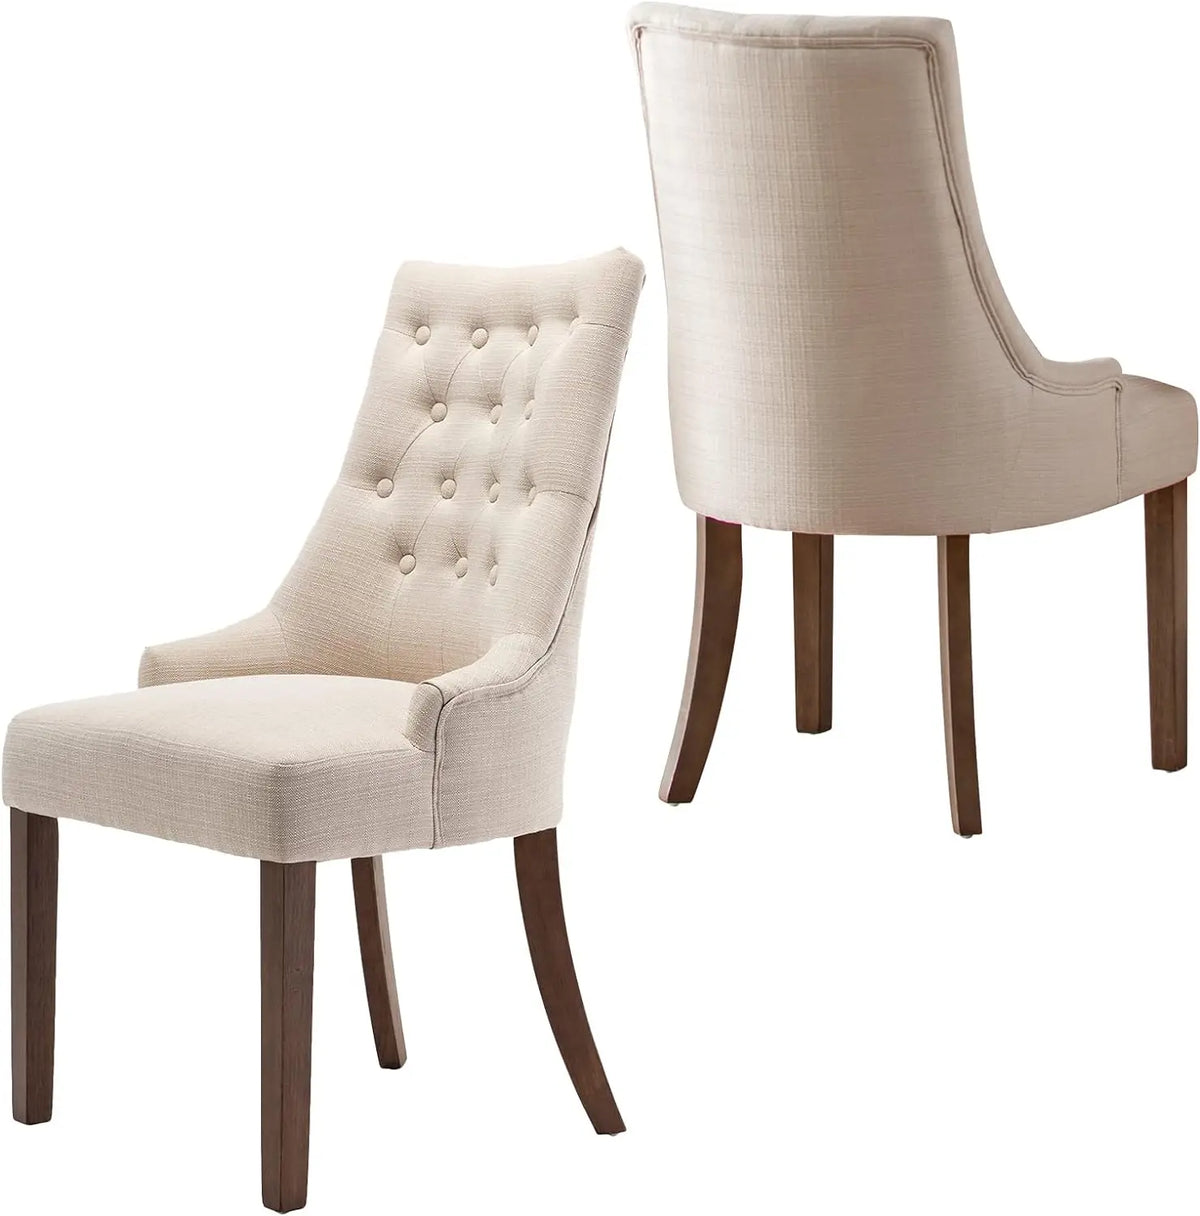 Wingback Upholstered Dining Chair 4-pc Set, Fabric Side Chair with Tufted Buttons - Farefe